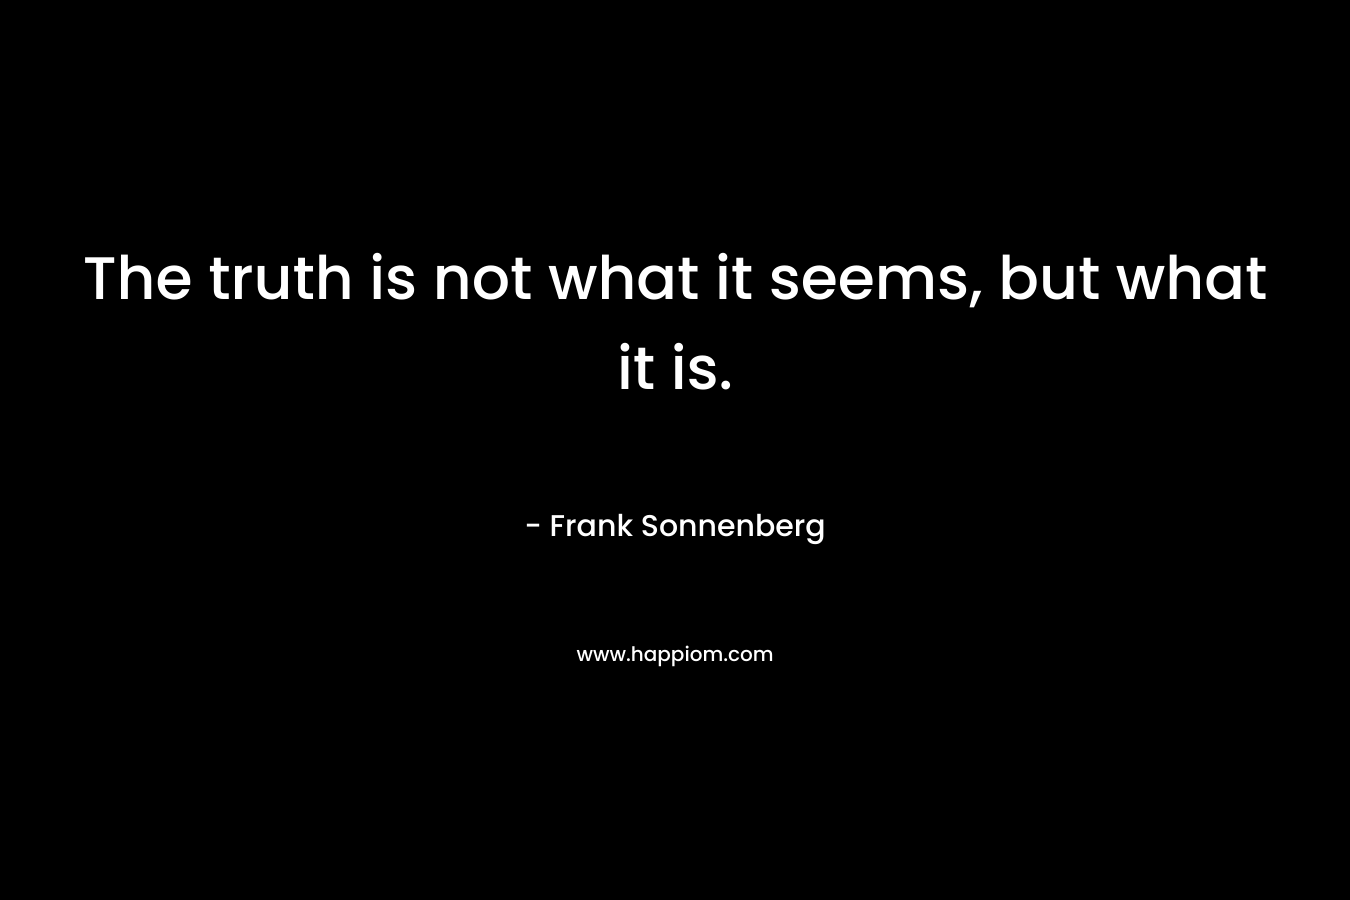 The truth is not what it seems, but what it is.